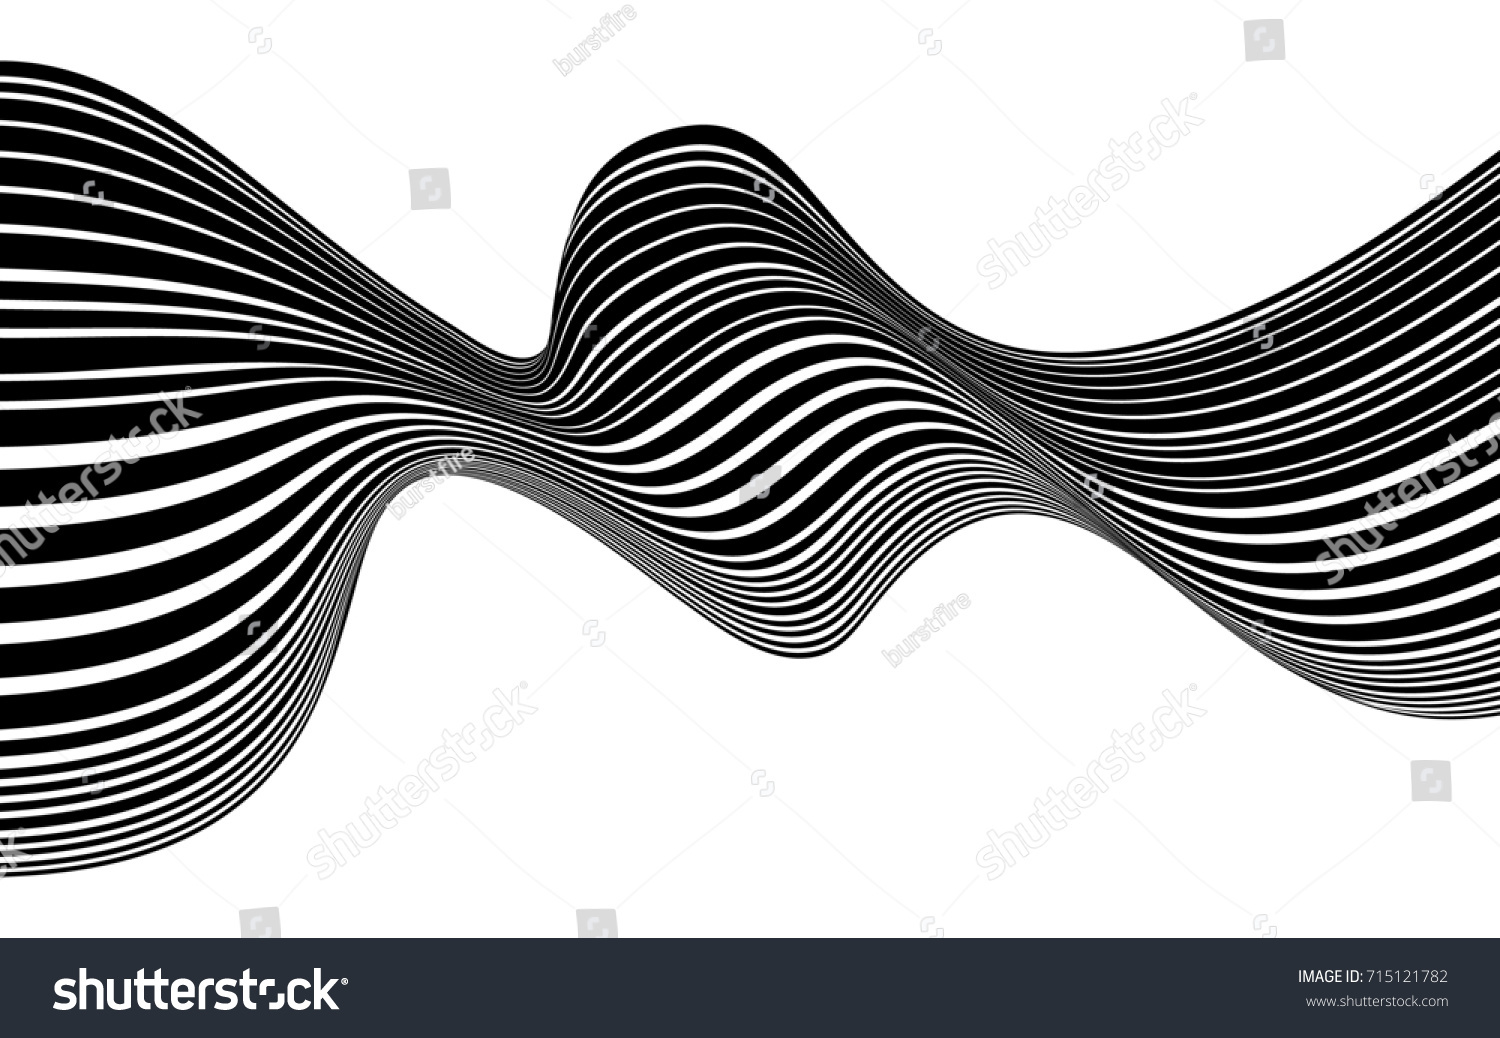 optical art abstract background wave design black and white #715121782